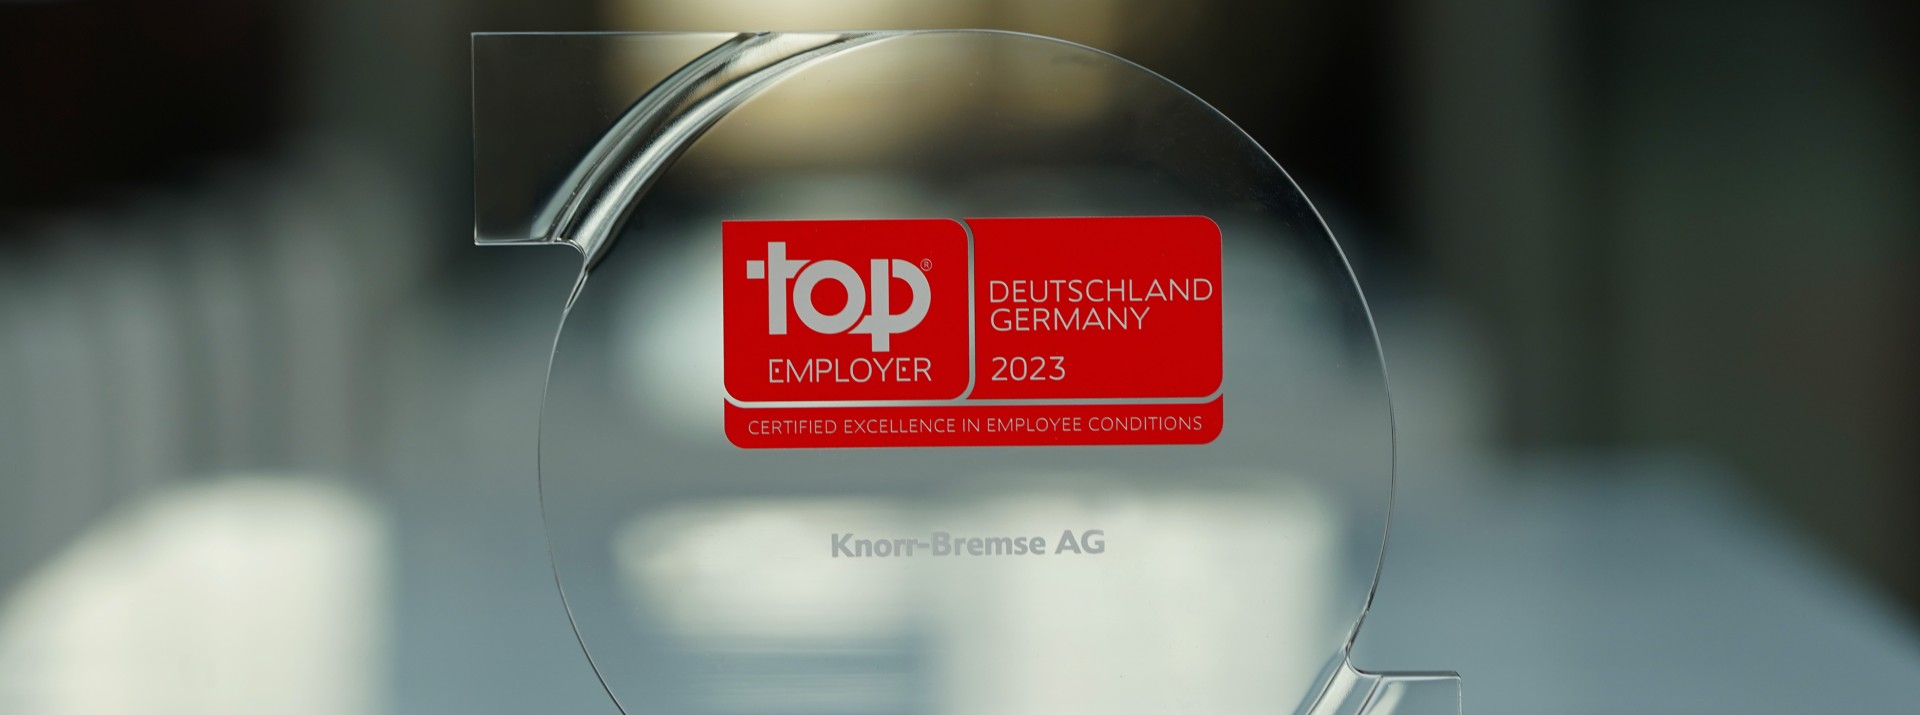 A close-up of the Top Employer Award, which Knorr-Bremse received for its employer performance for the tenth year in a row.